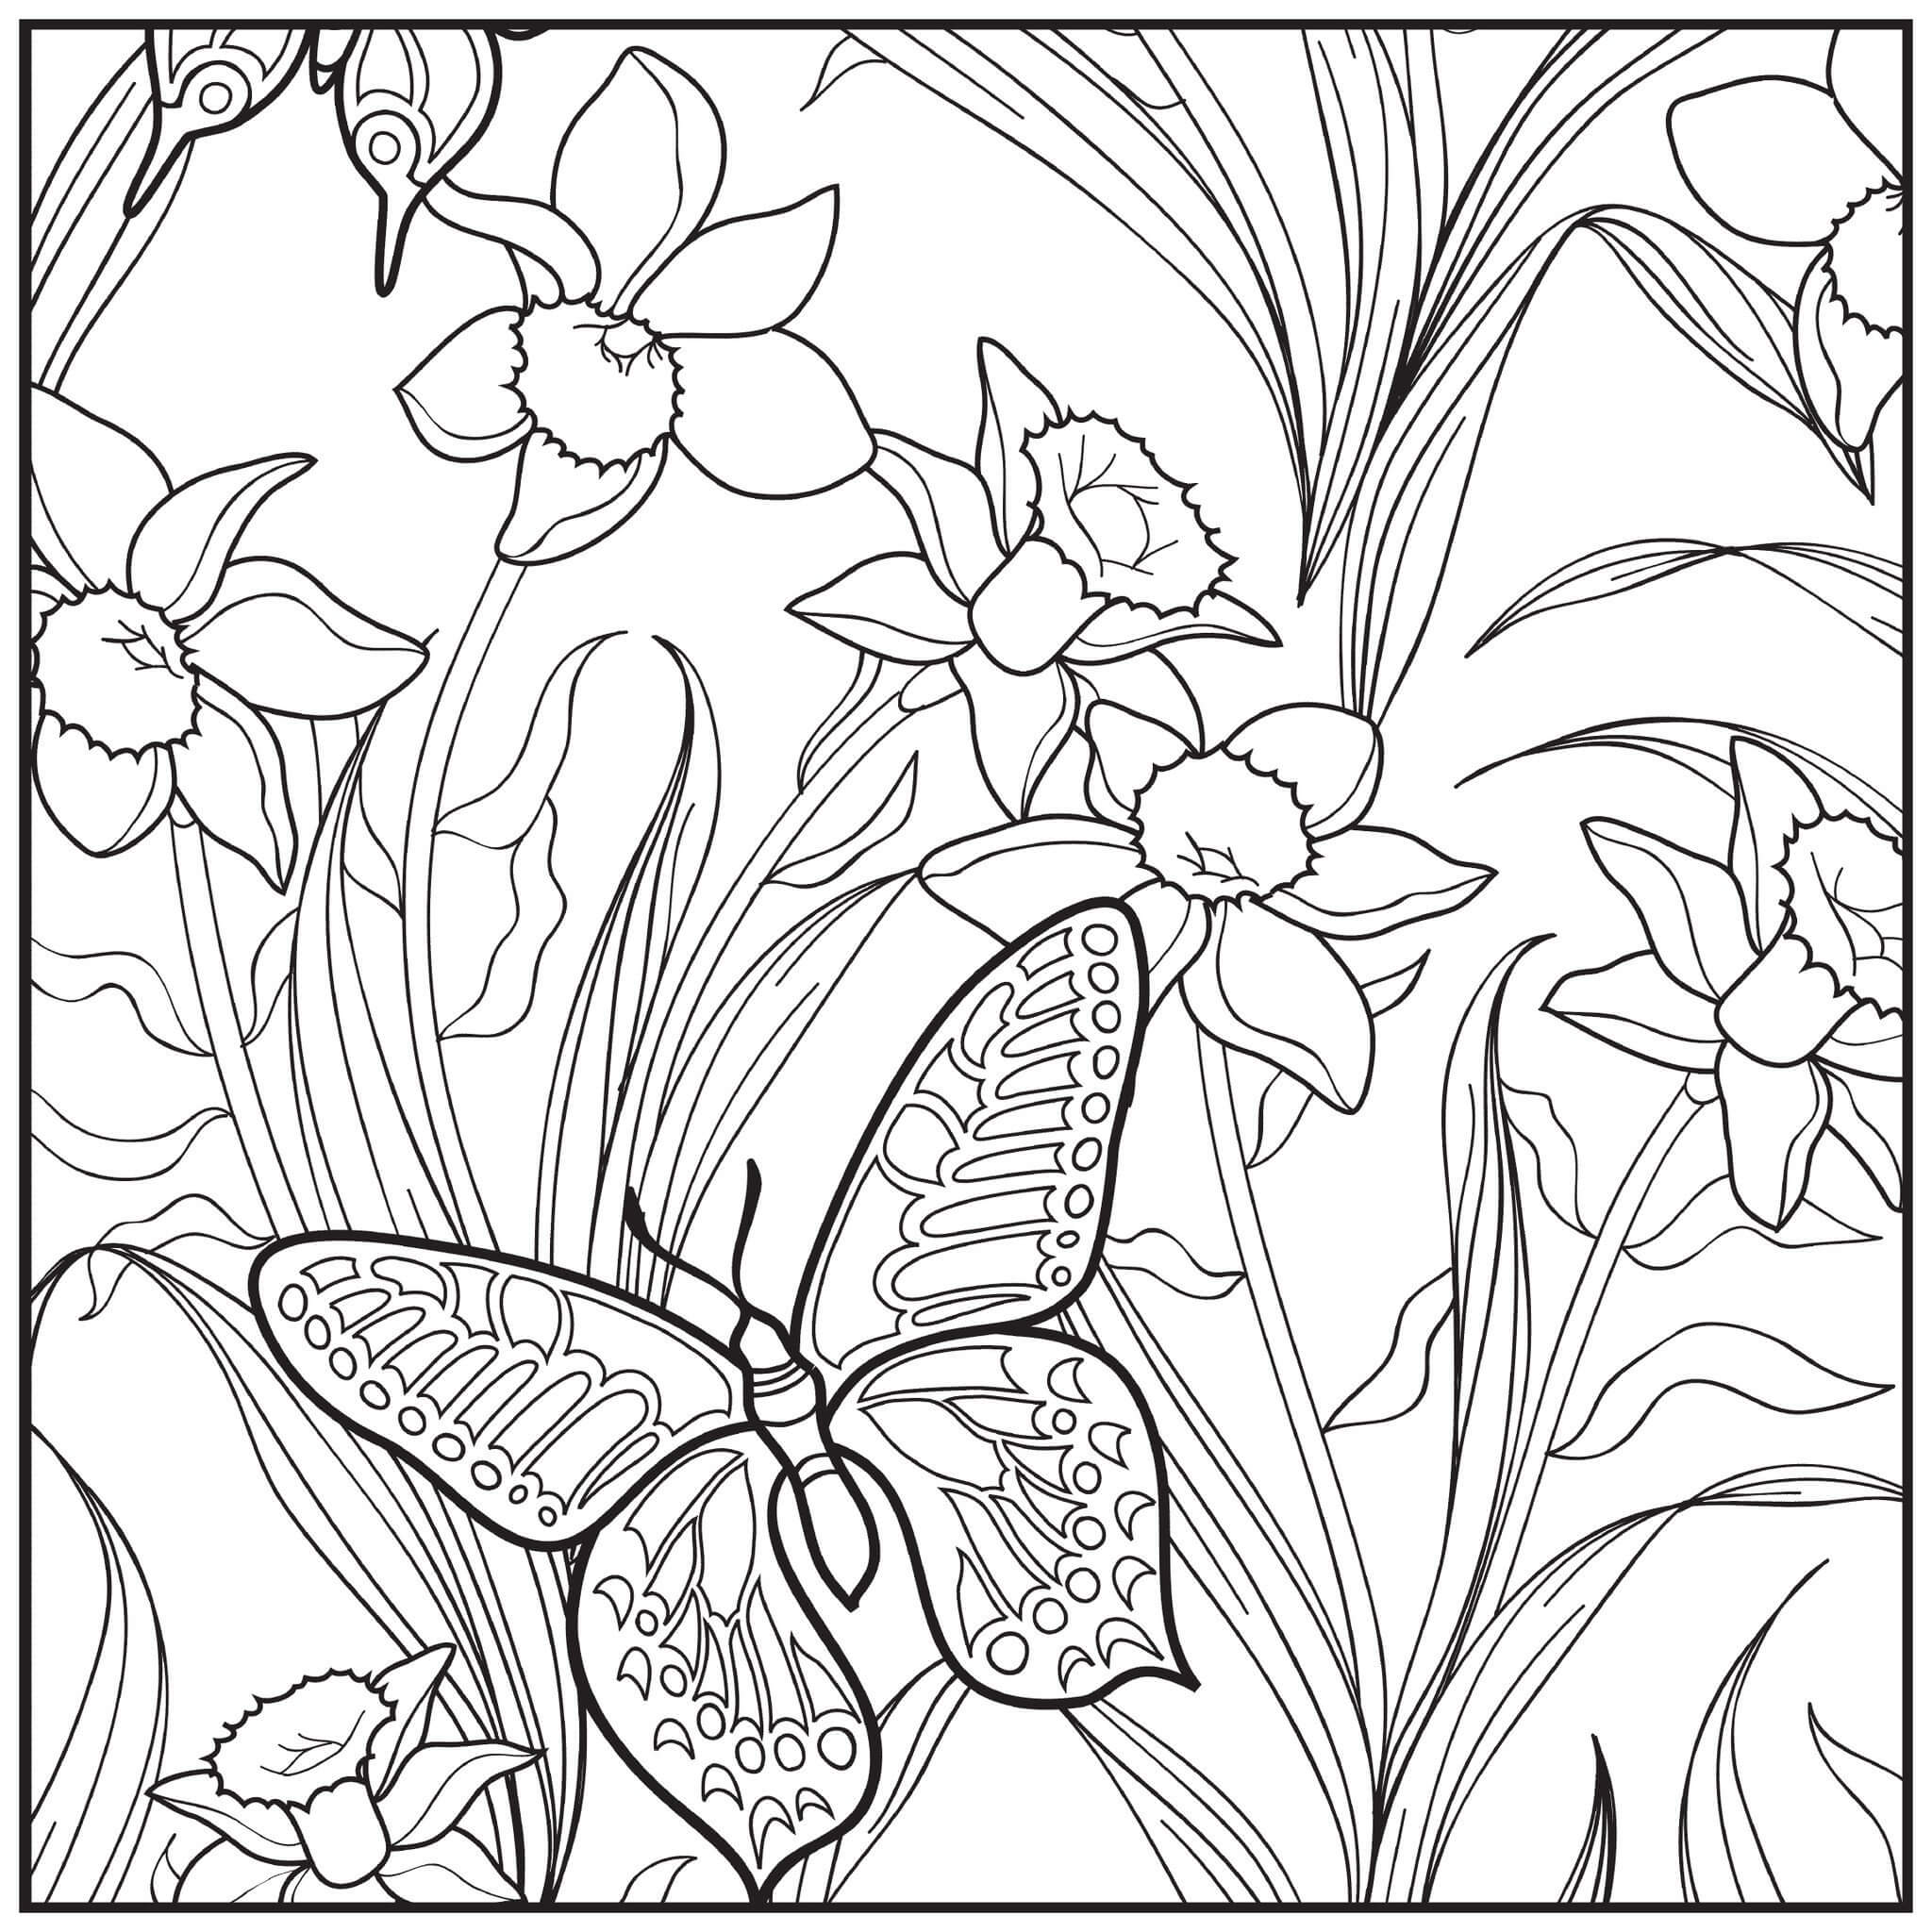 Butterfly in Garden Coloring Page